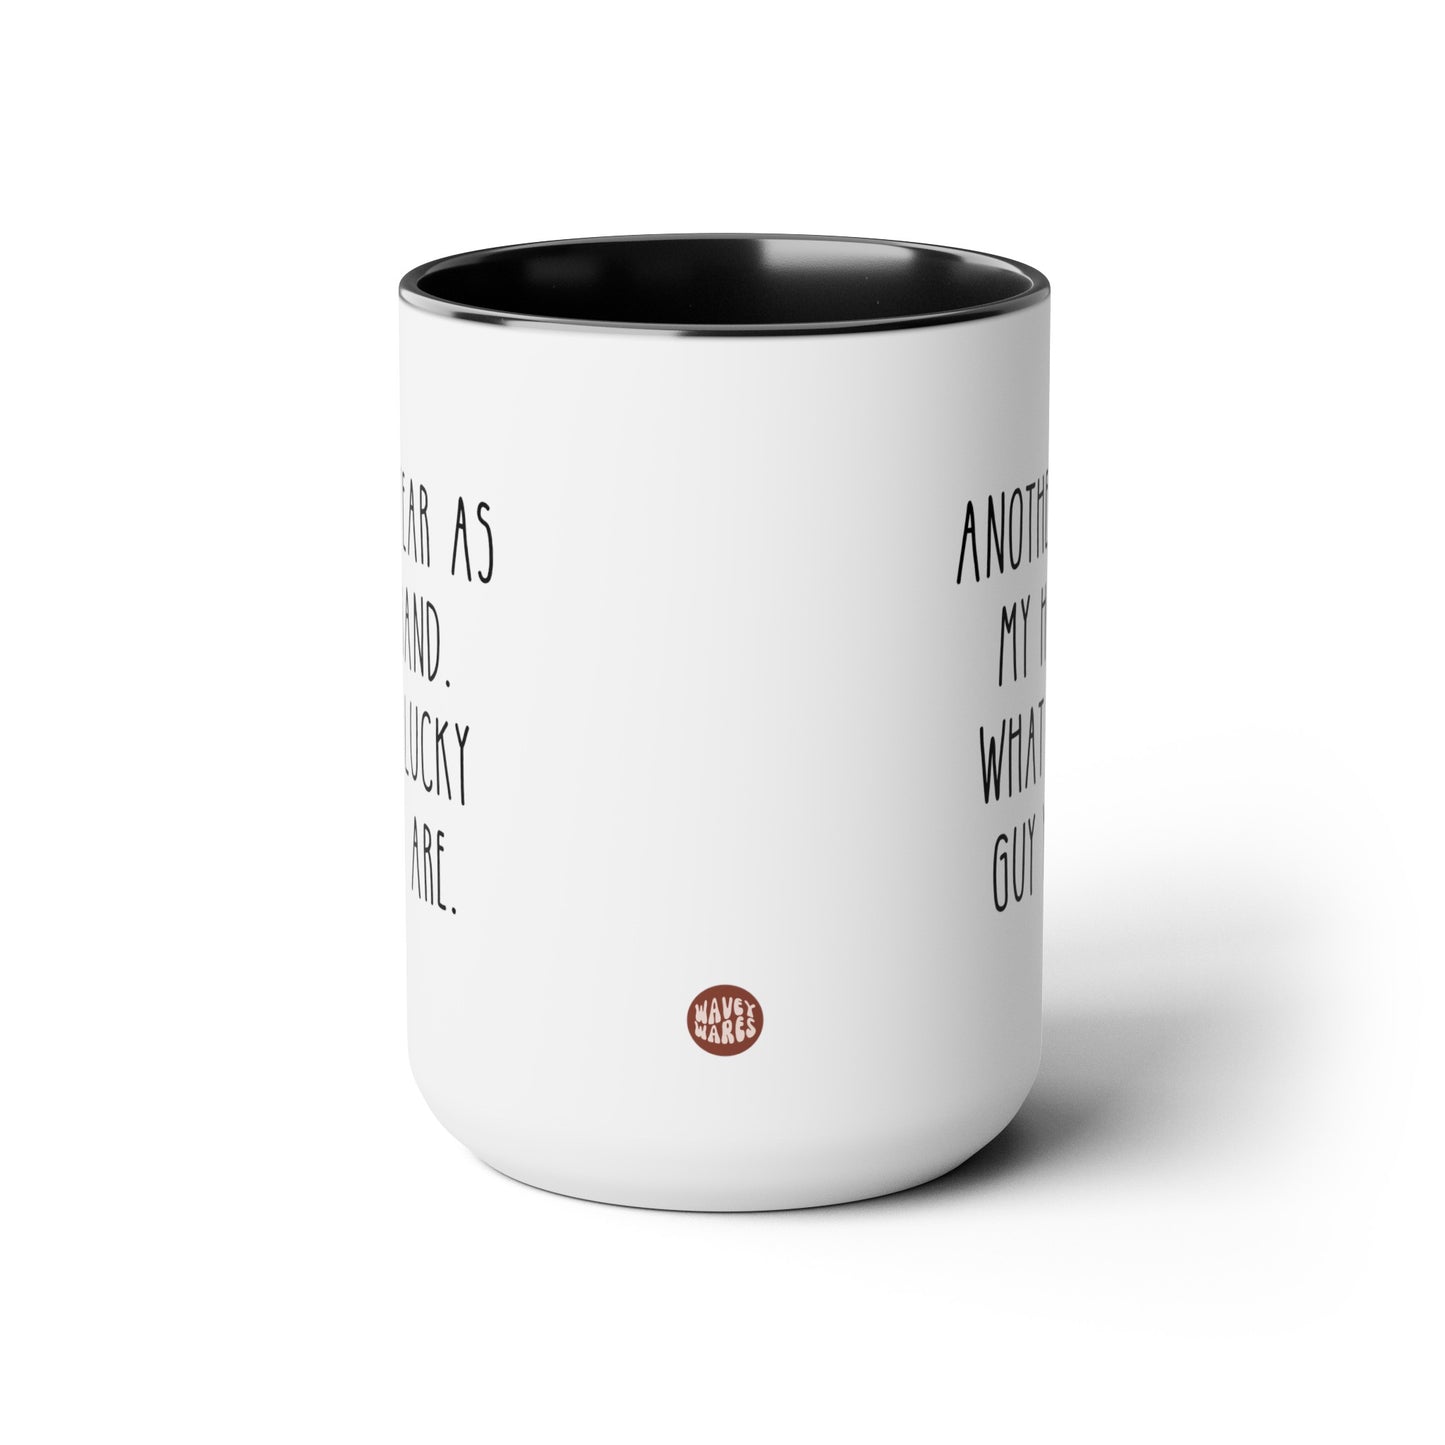 Another Year As My Husband What A Lucky Guy You Are 15oz white with black accent funny large coffee mug gift for Valentines sarcastic hubby fiance wedding anniversary waveywares wavey wares wavywares wavy wares side